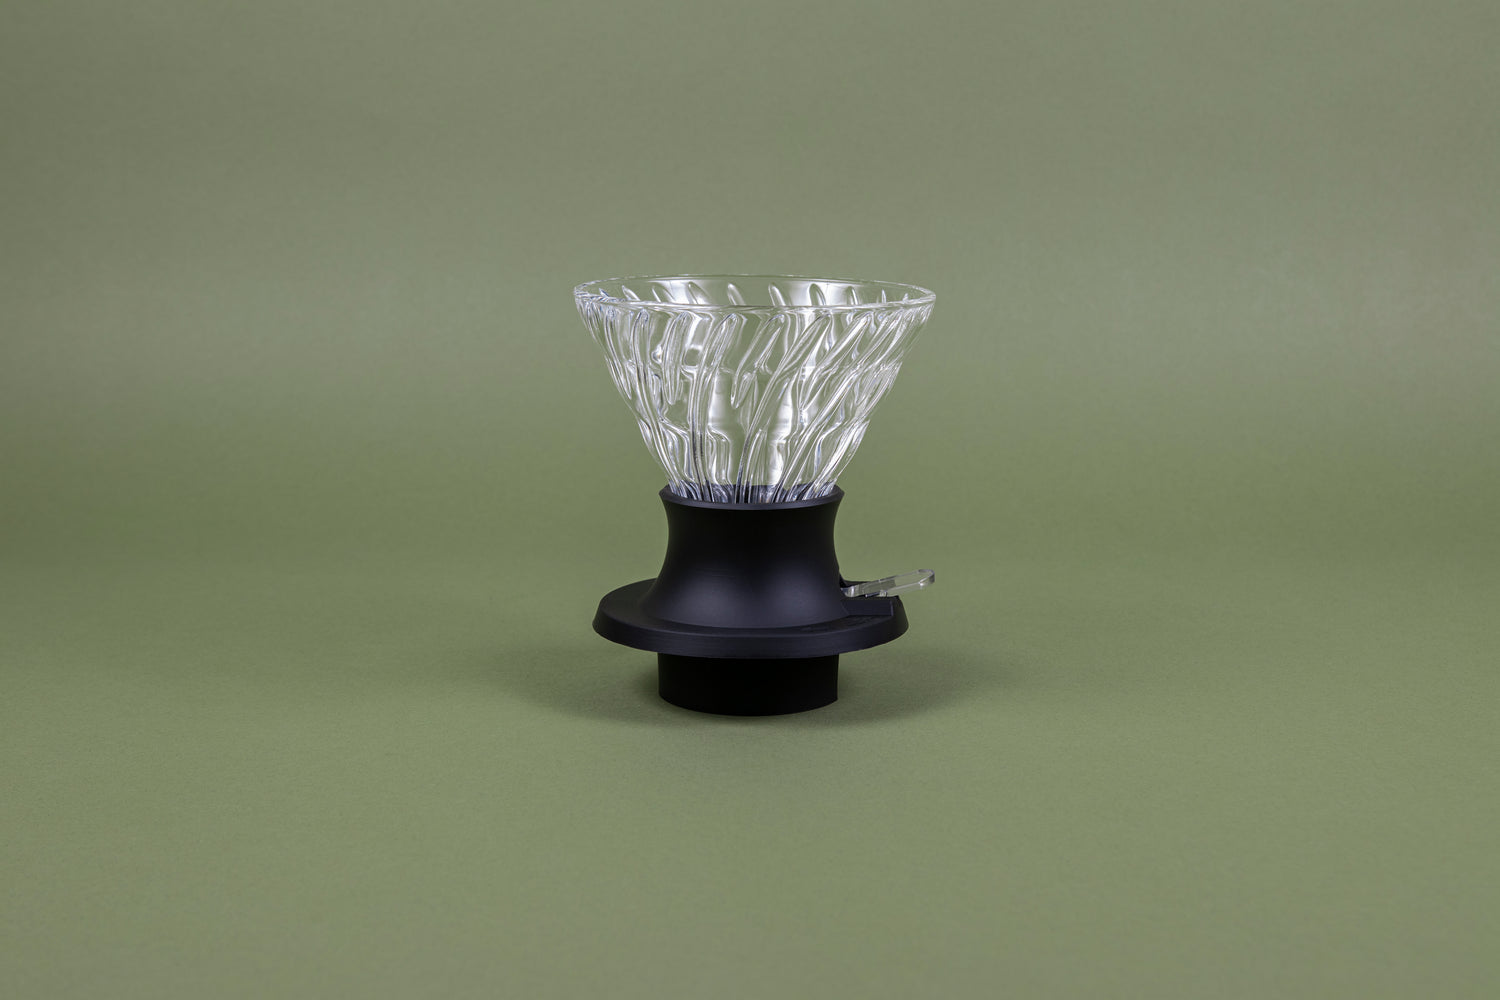 Cone-shaped glass dripper seated in a black plastic silicone base with clear plastic push switch on a green background.